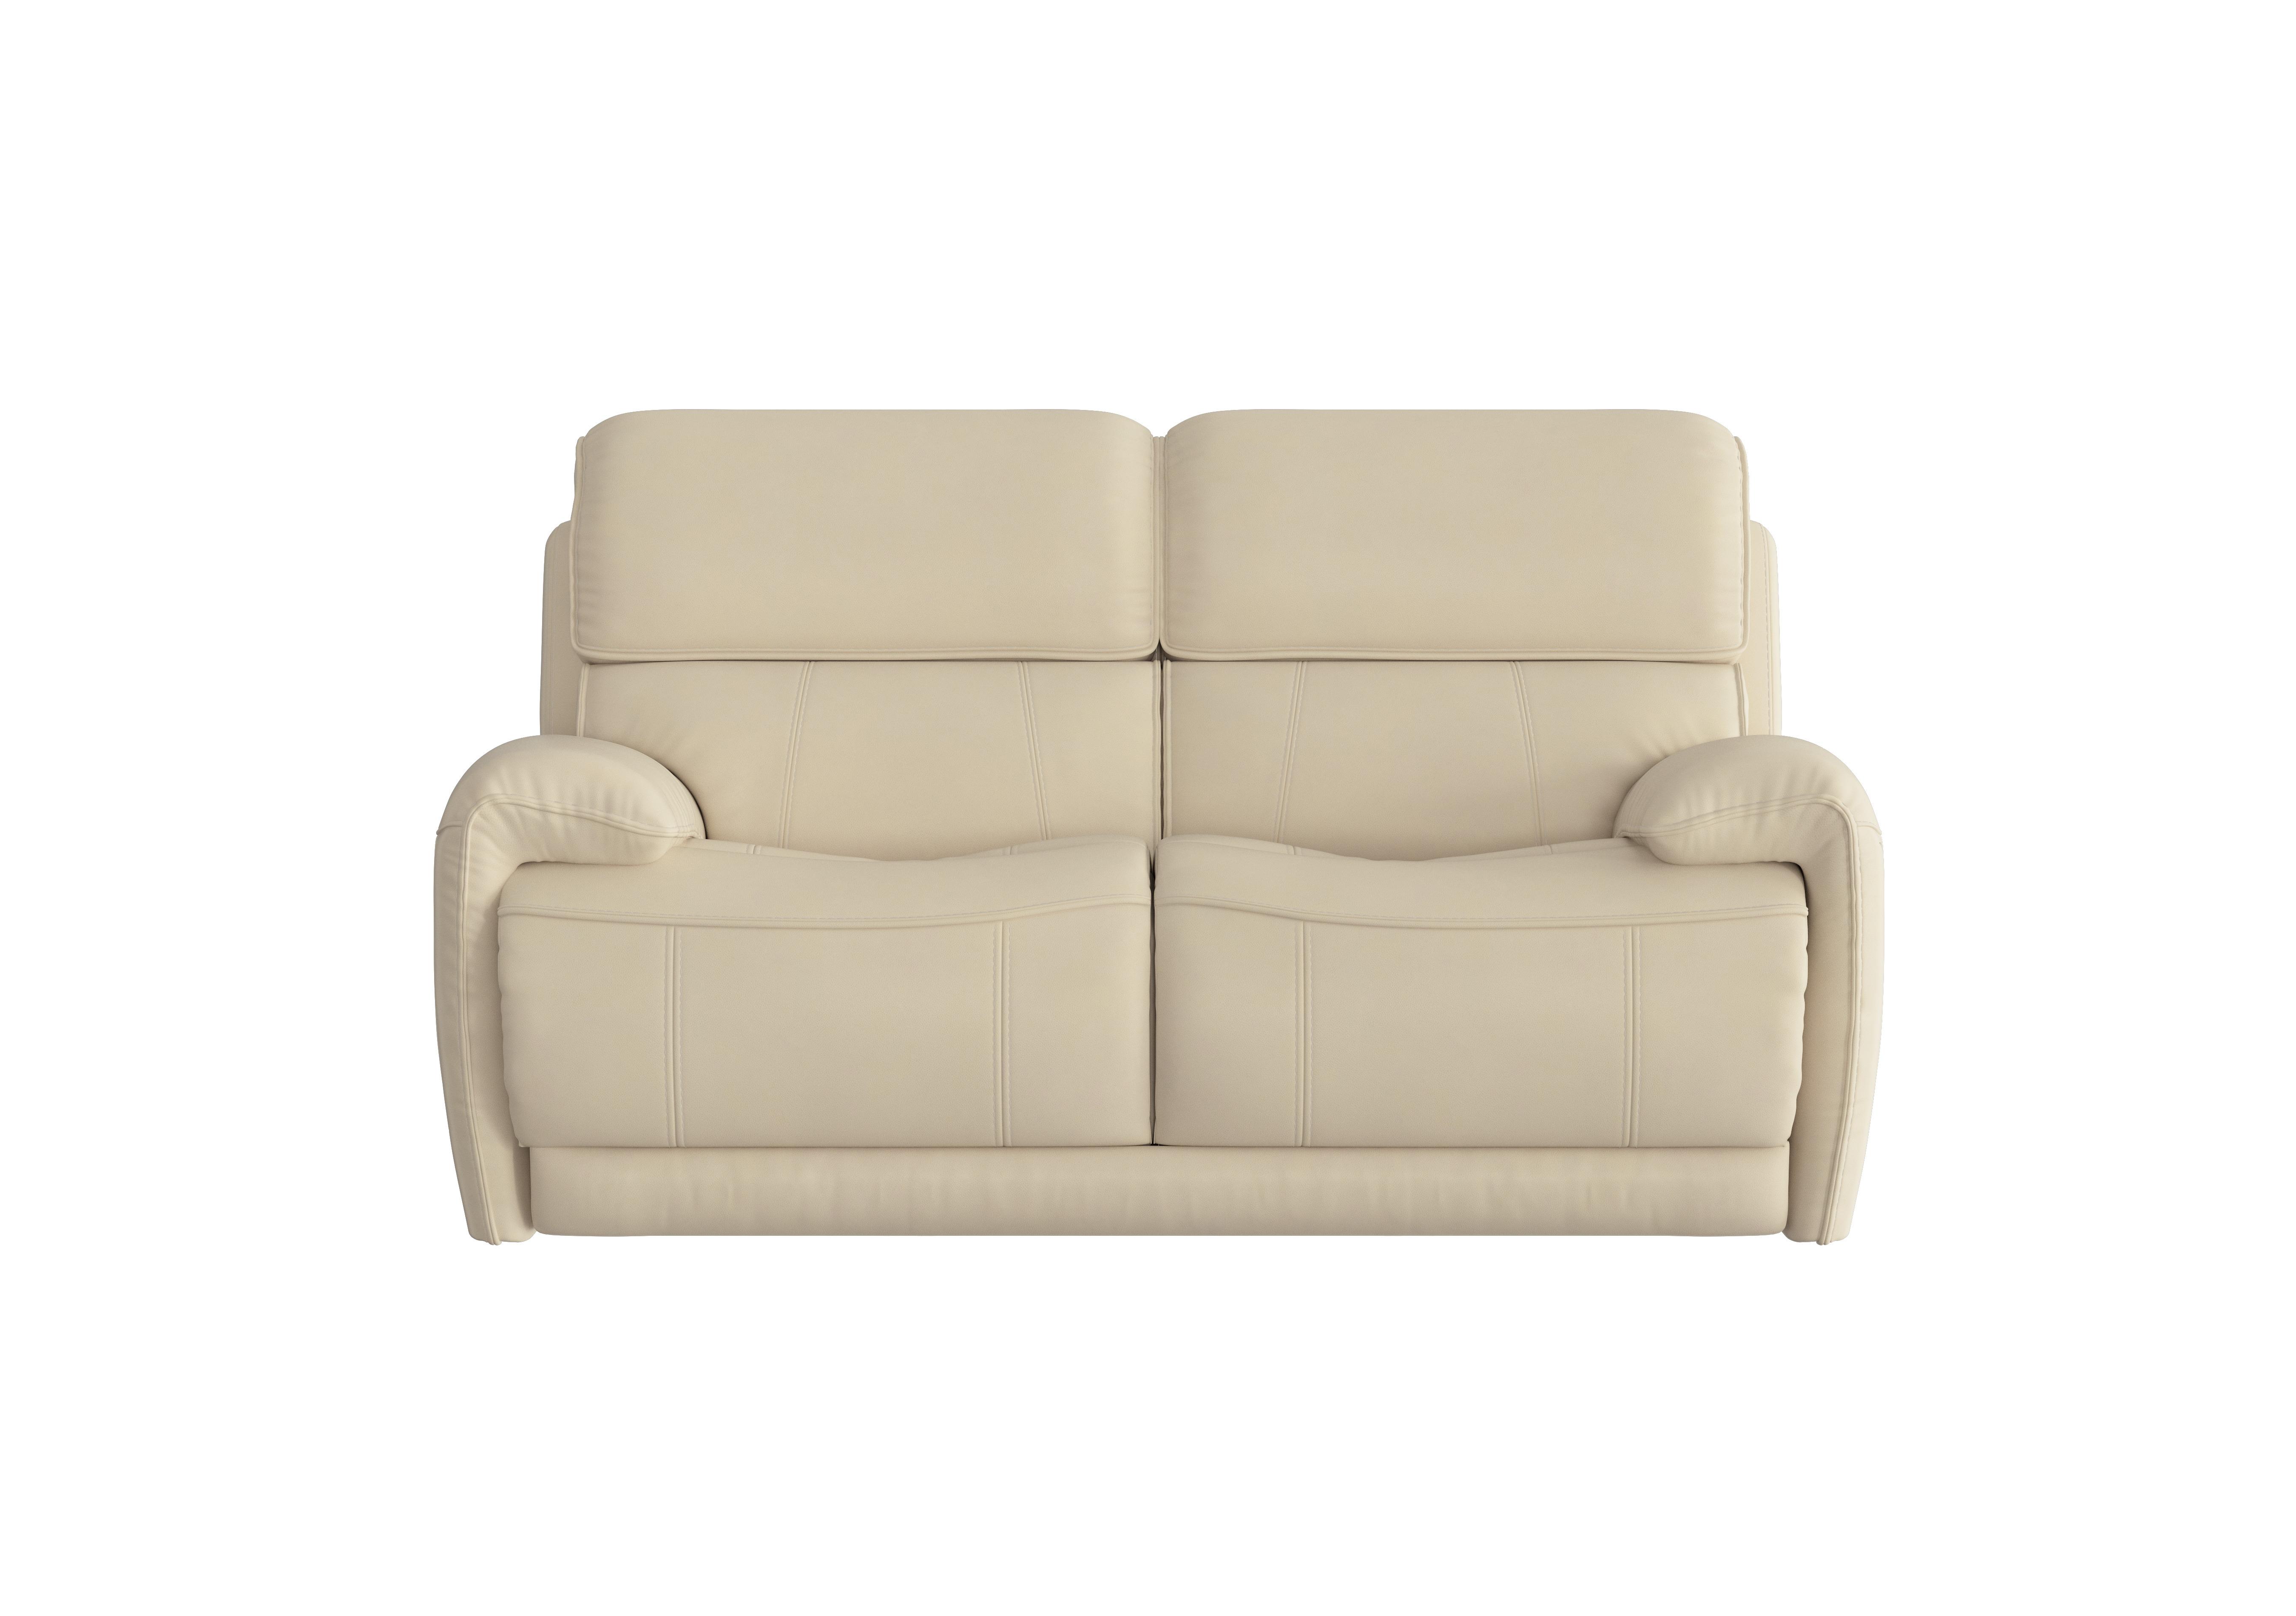 Link 2 Seater Leather Sofa in Bv-862c Bisque on Furniture Village